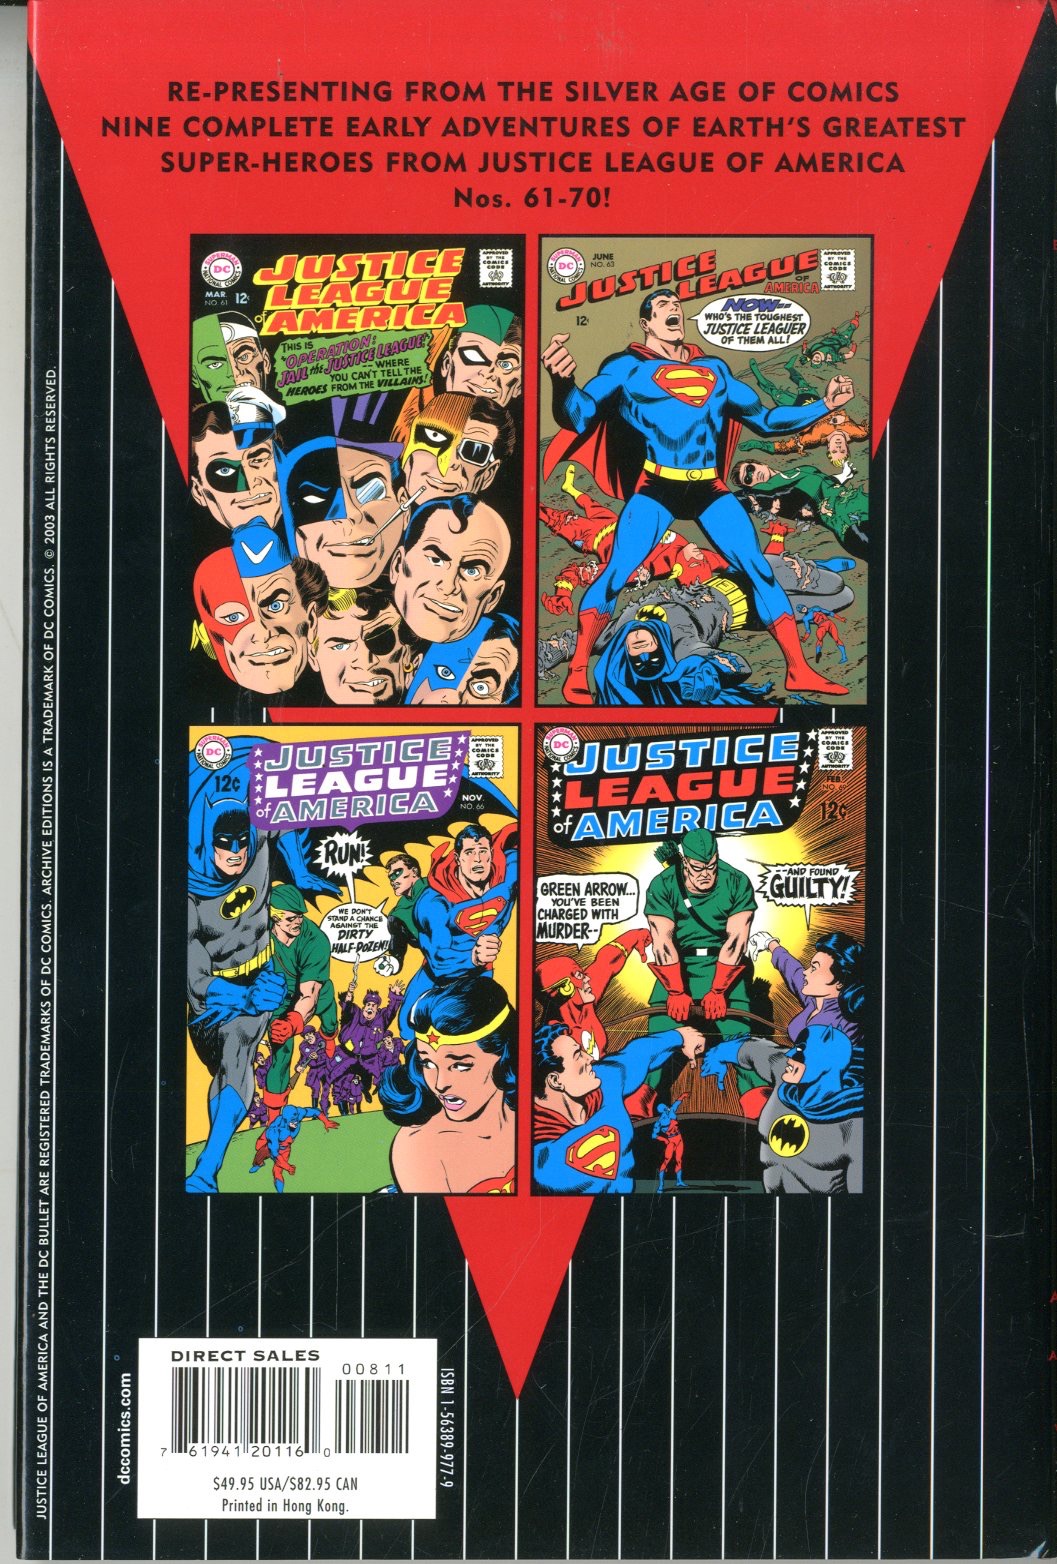 Archive Editions Justice League Of America - 14227